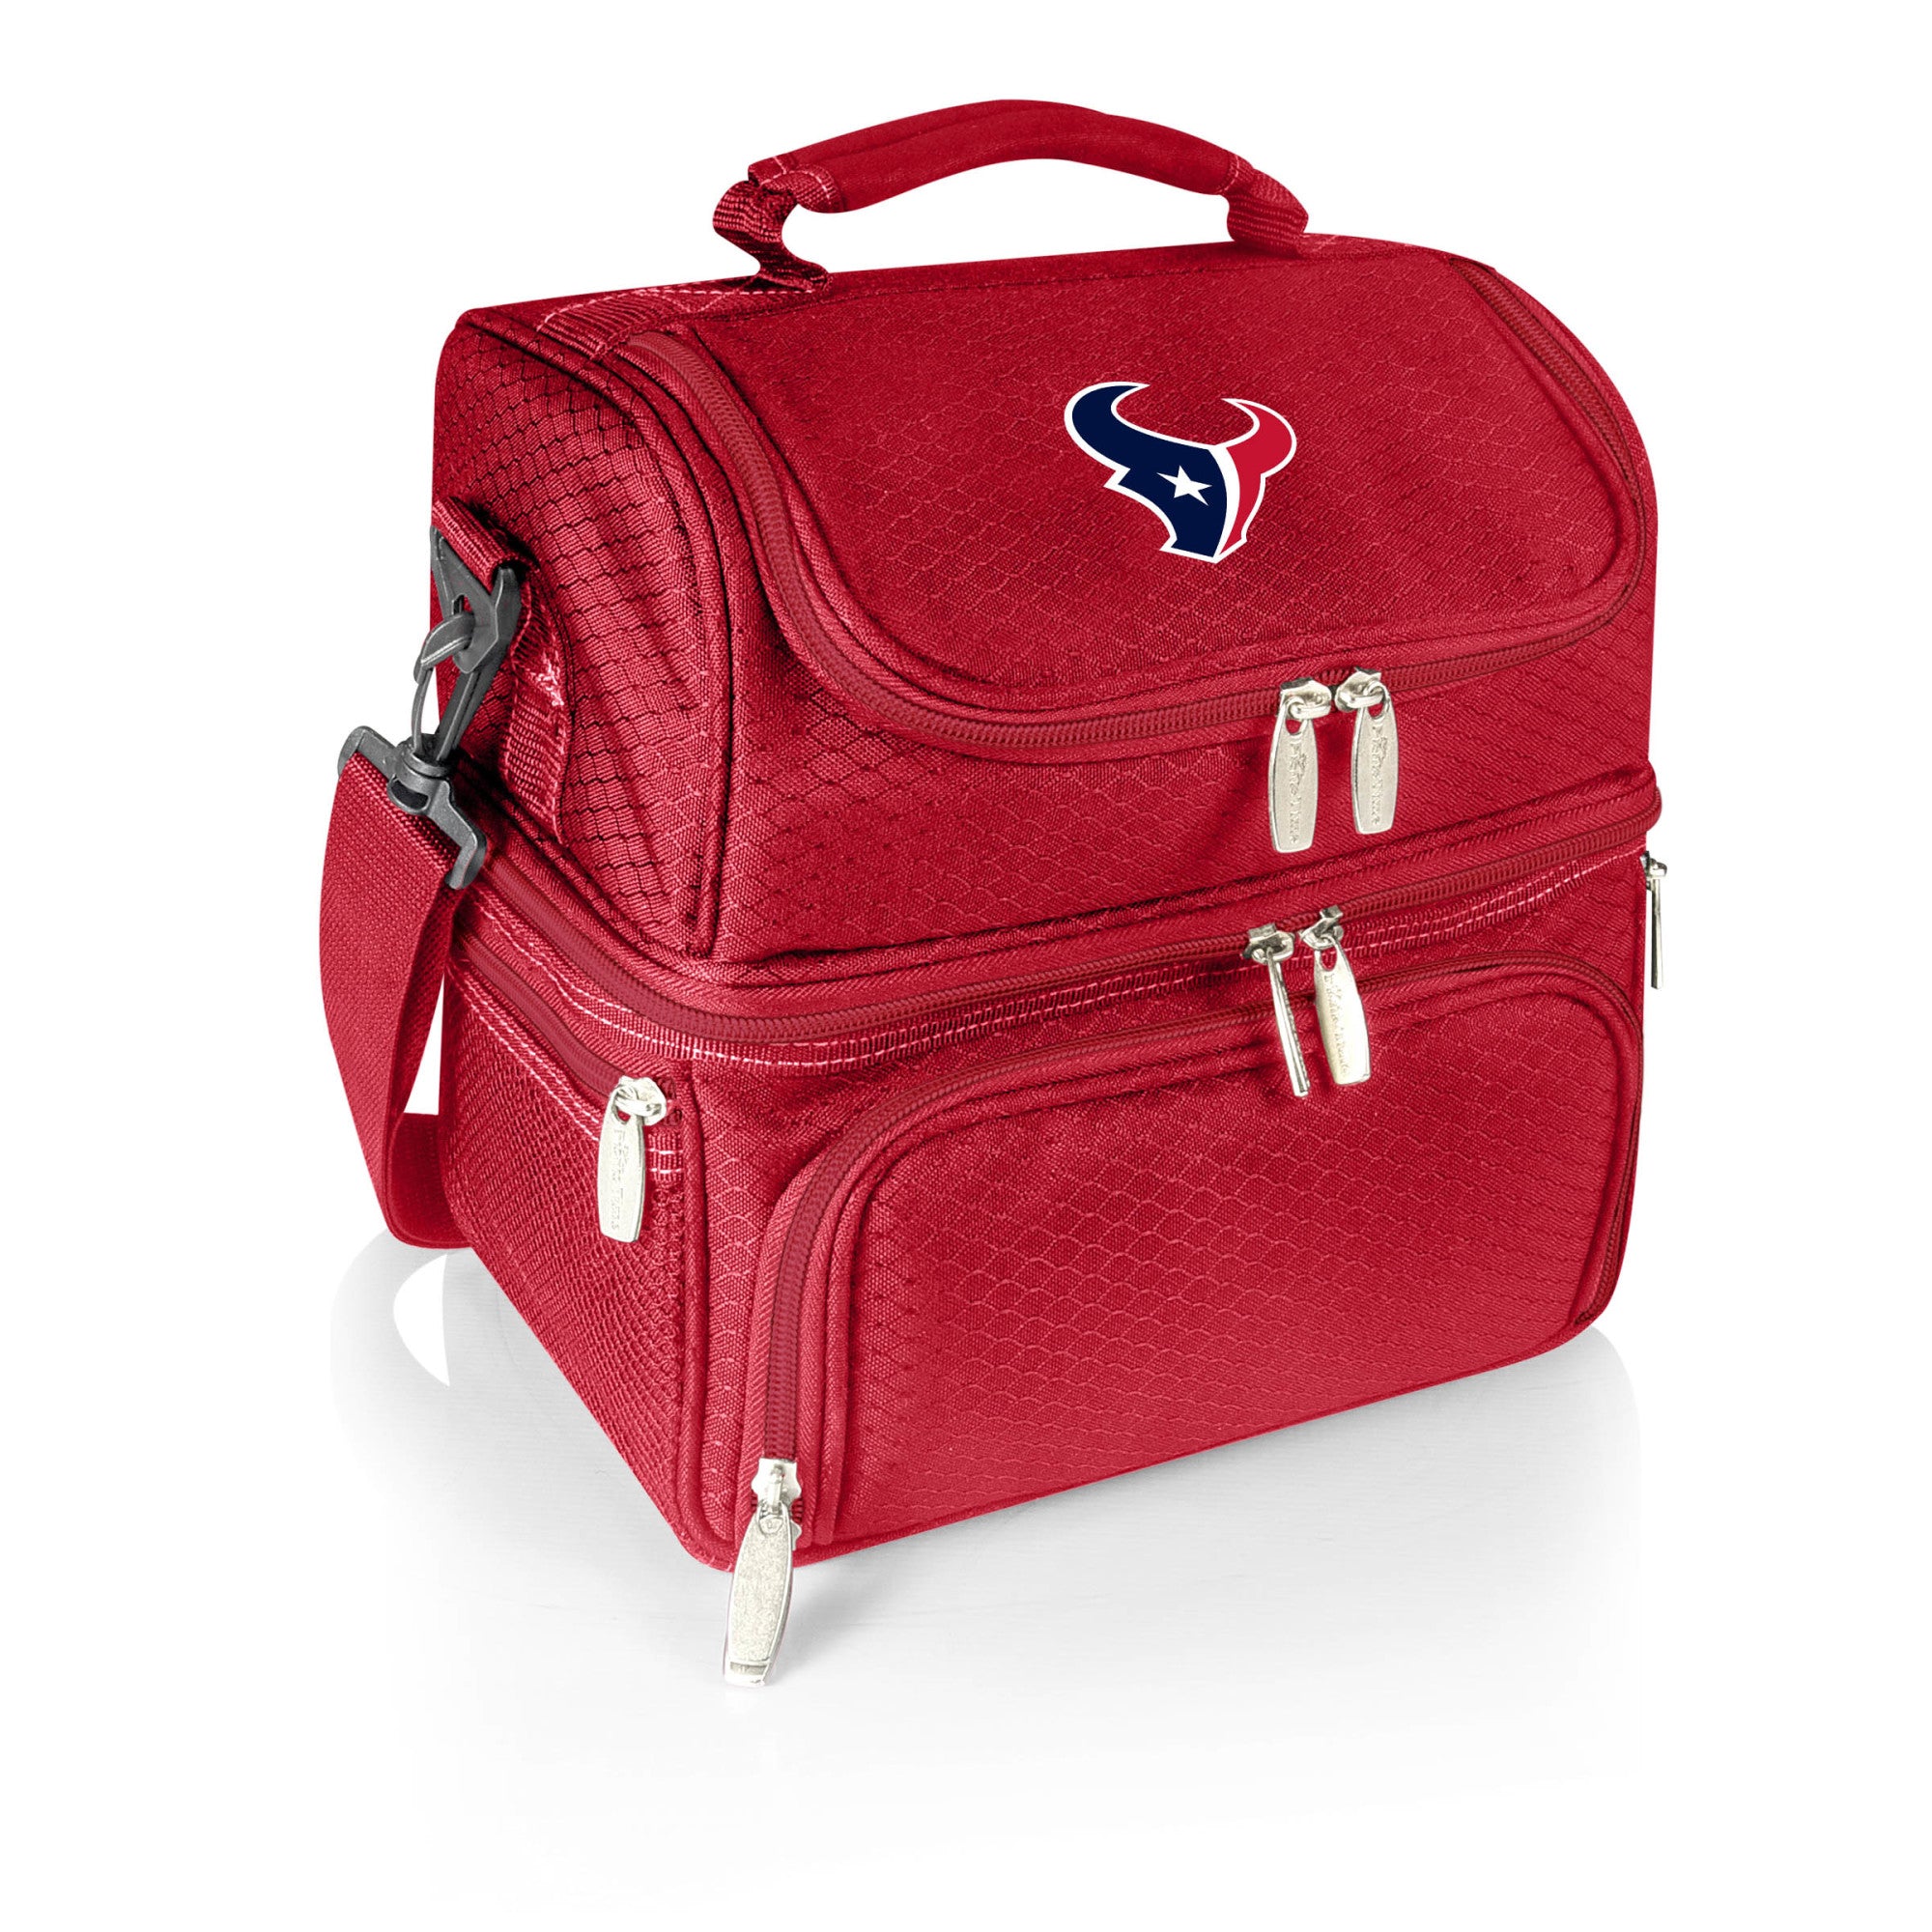 Houston Texans - Pranzo Lunch Bag Cooler with Utensils